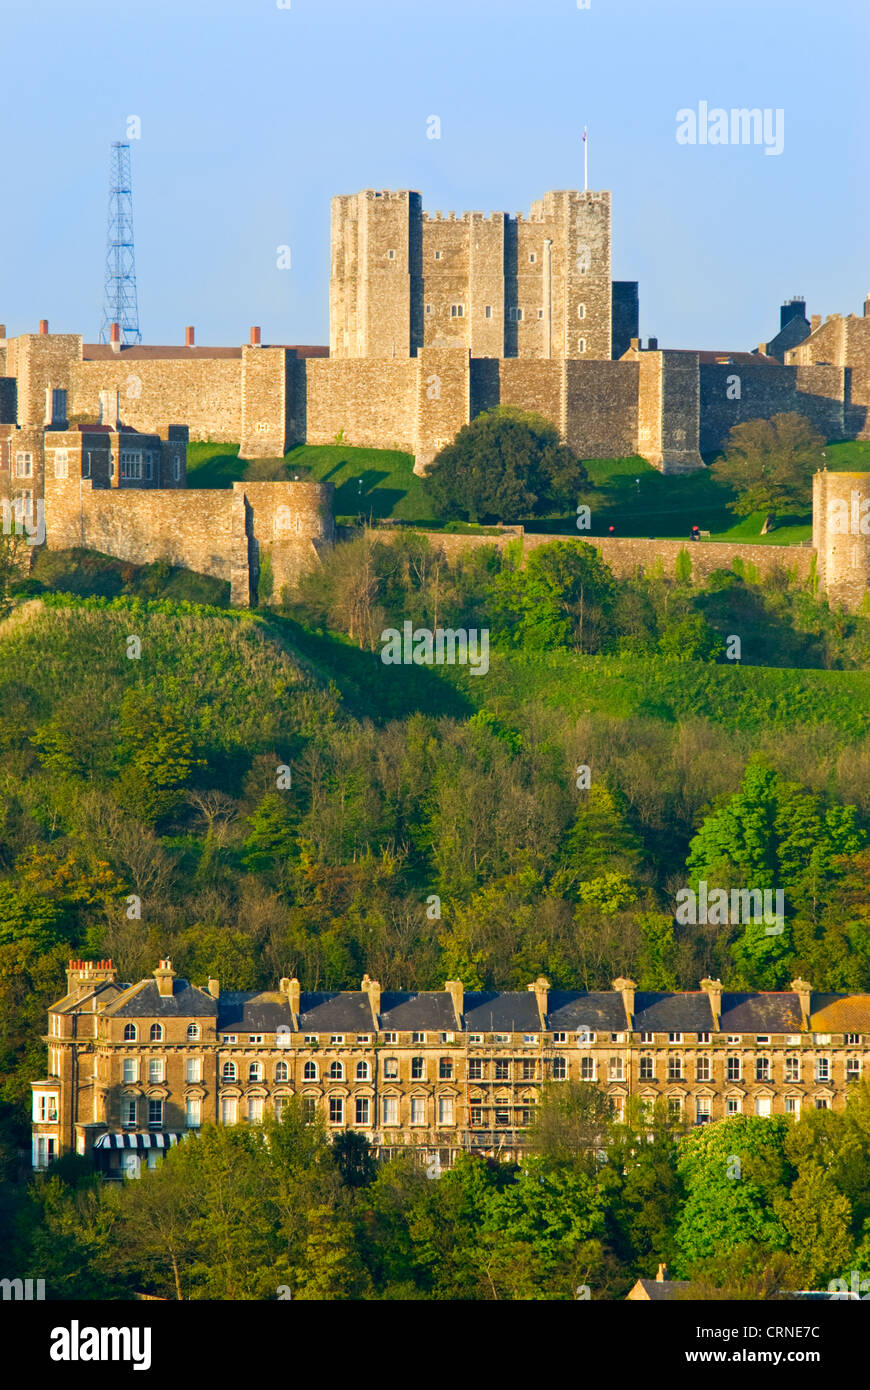 Dover Castle on top of the famous white cliffs, built in the 12th century under the reign of Henry ll. Stock Photo